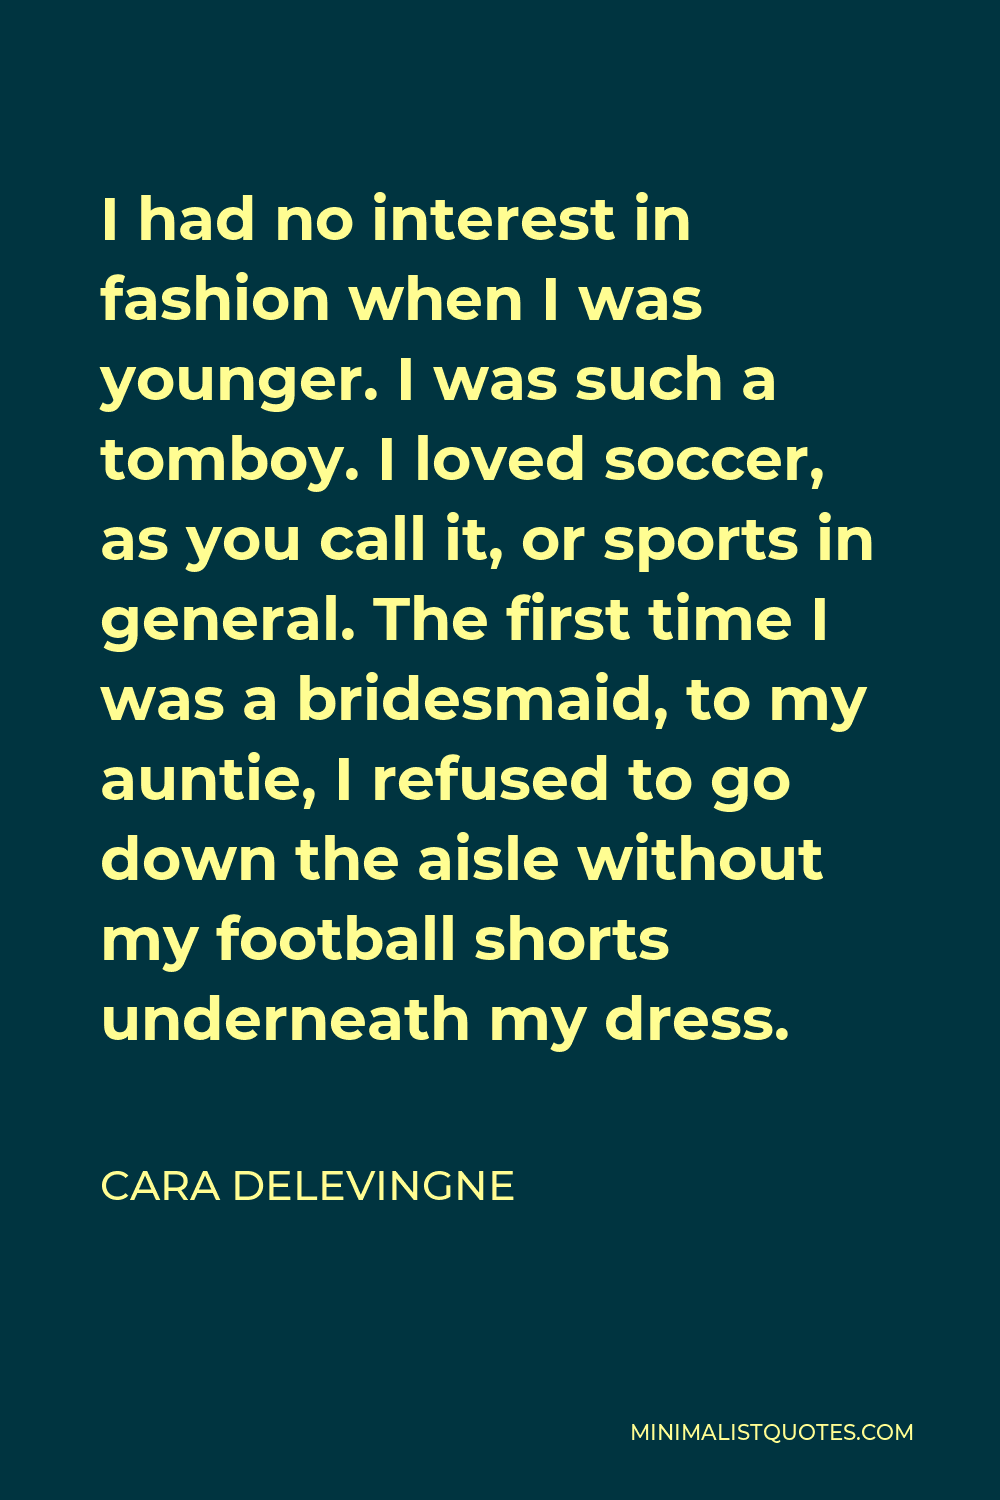 Cara Delevingne Quote - I had no interest in fashion when I was younger. I was such a tomboy.